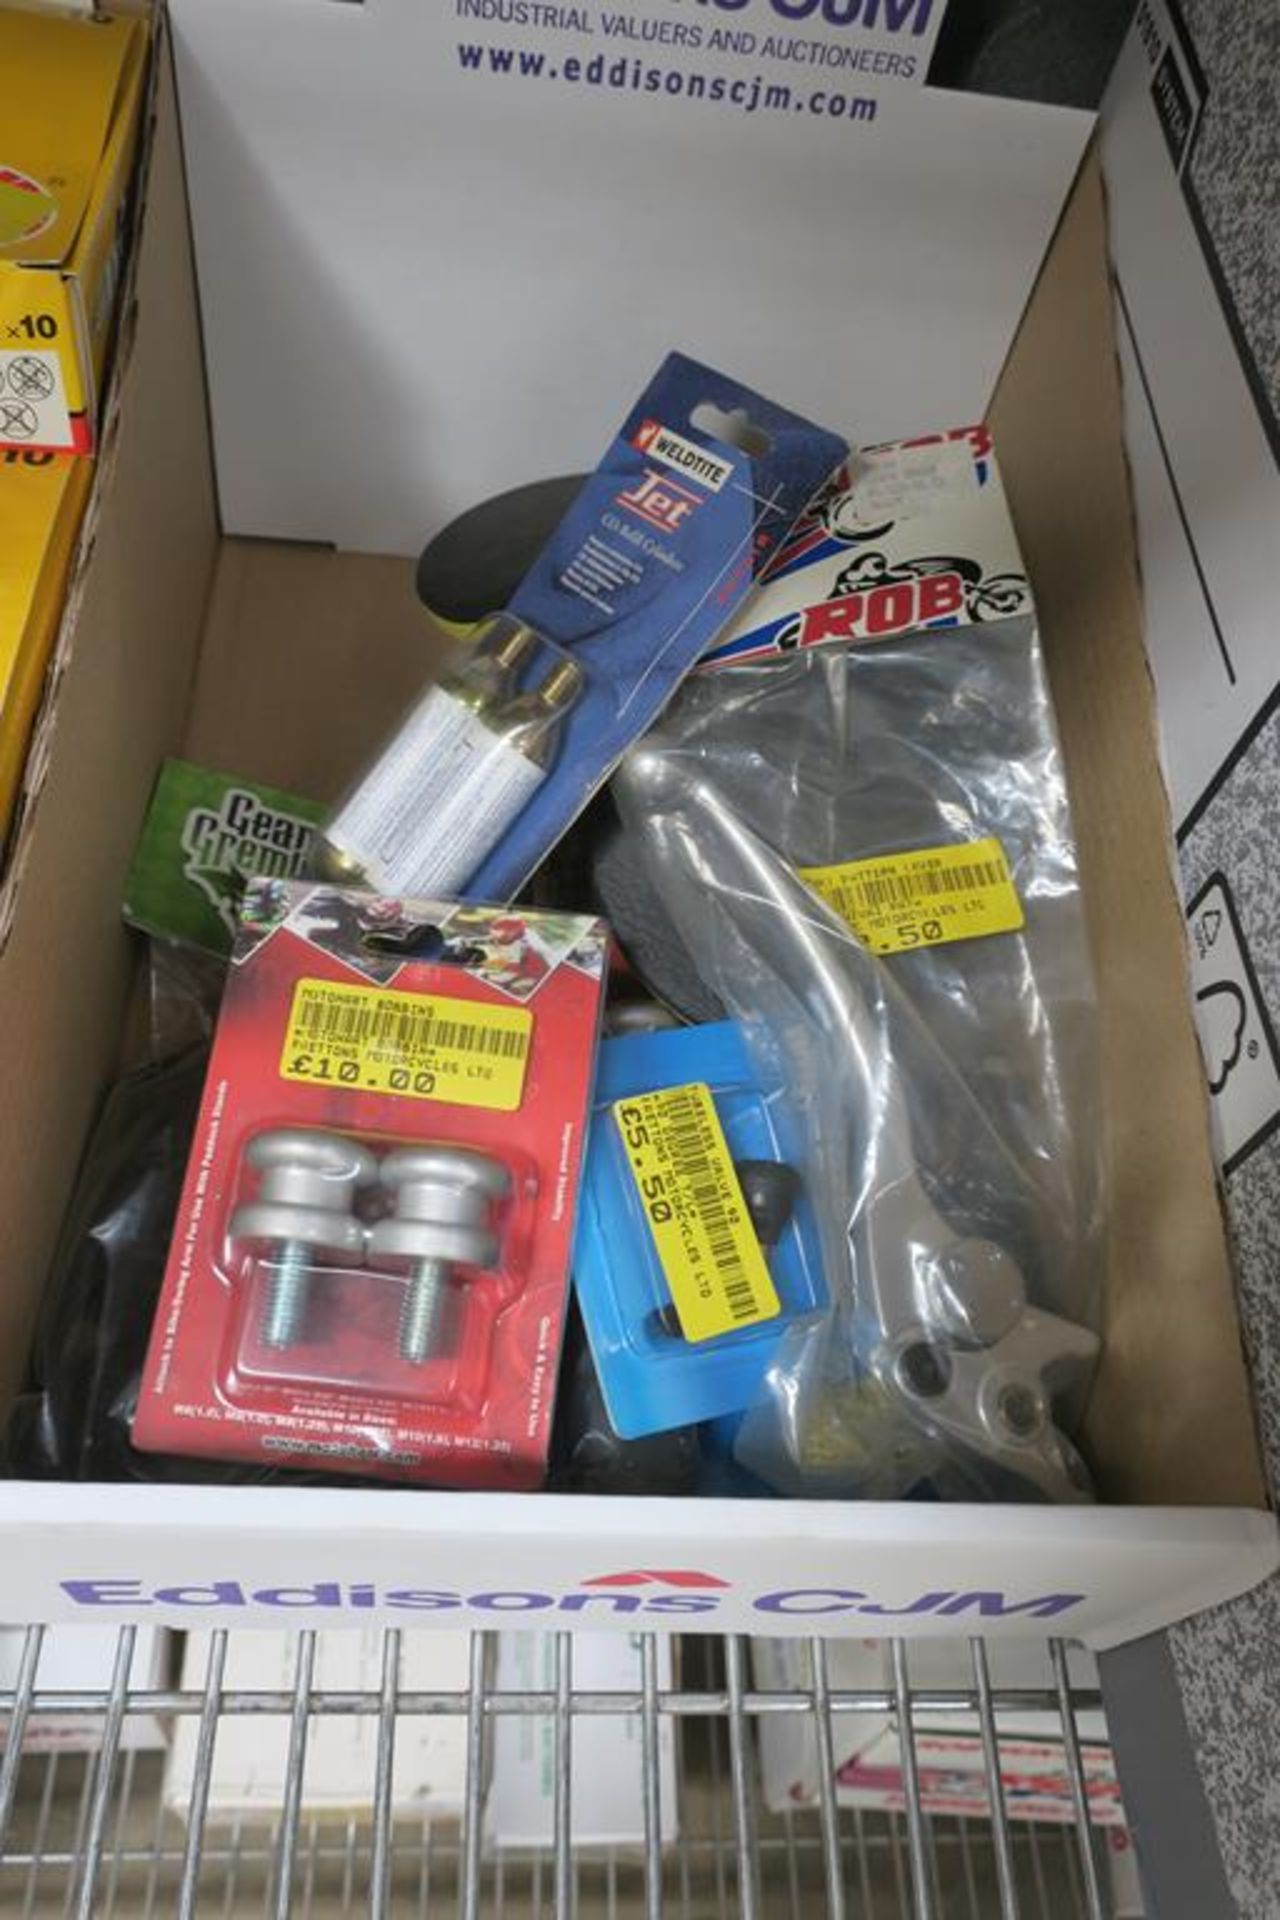 Assorted Qty of Vehicle Bulbs, Motohart Bobbins, CO₂ Refill Cylinders etc. - Image 8 of 9